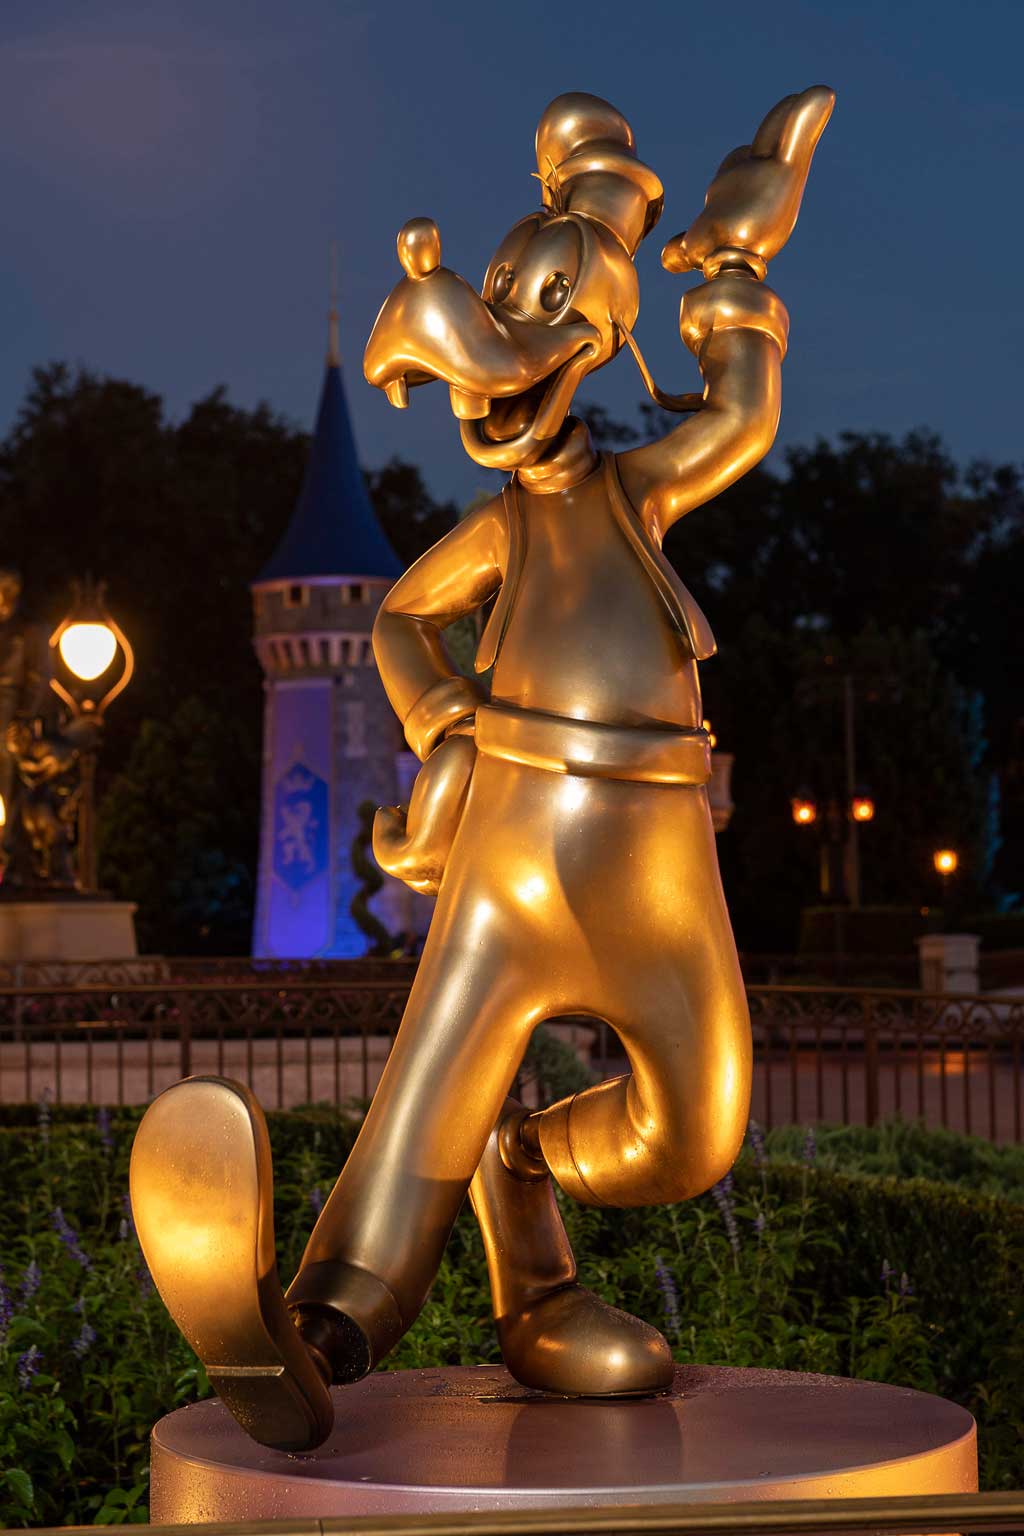 Goofy at Magic Kingdom Park is one of the “Disney Fab 50” golden character sculptures appearing in all four Walt Disney World Resort theme parks in Lake Buena Vista, Fla., as part of “The World’s Most Magical Celebration,” beginning Oct. 1, 2021, in honor of the resort’s 50th anniversary. (David Roark, photographer)